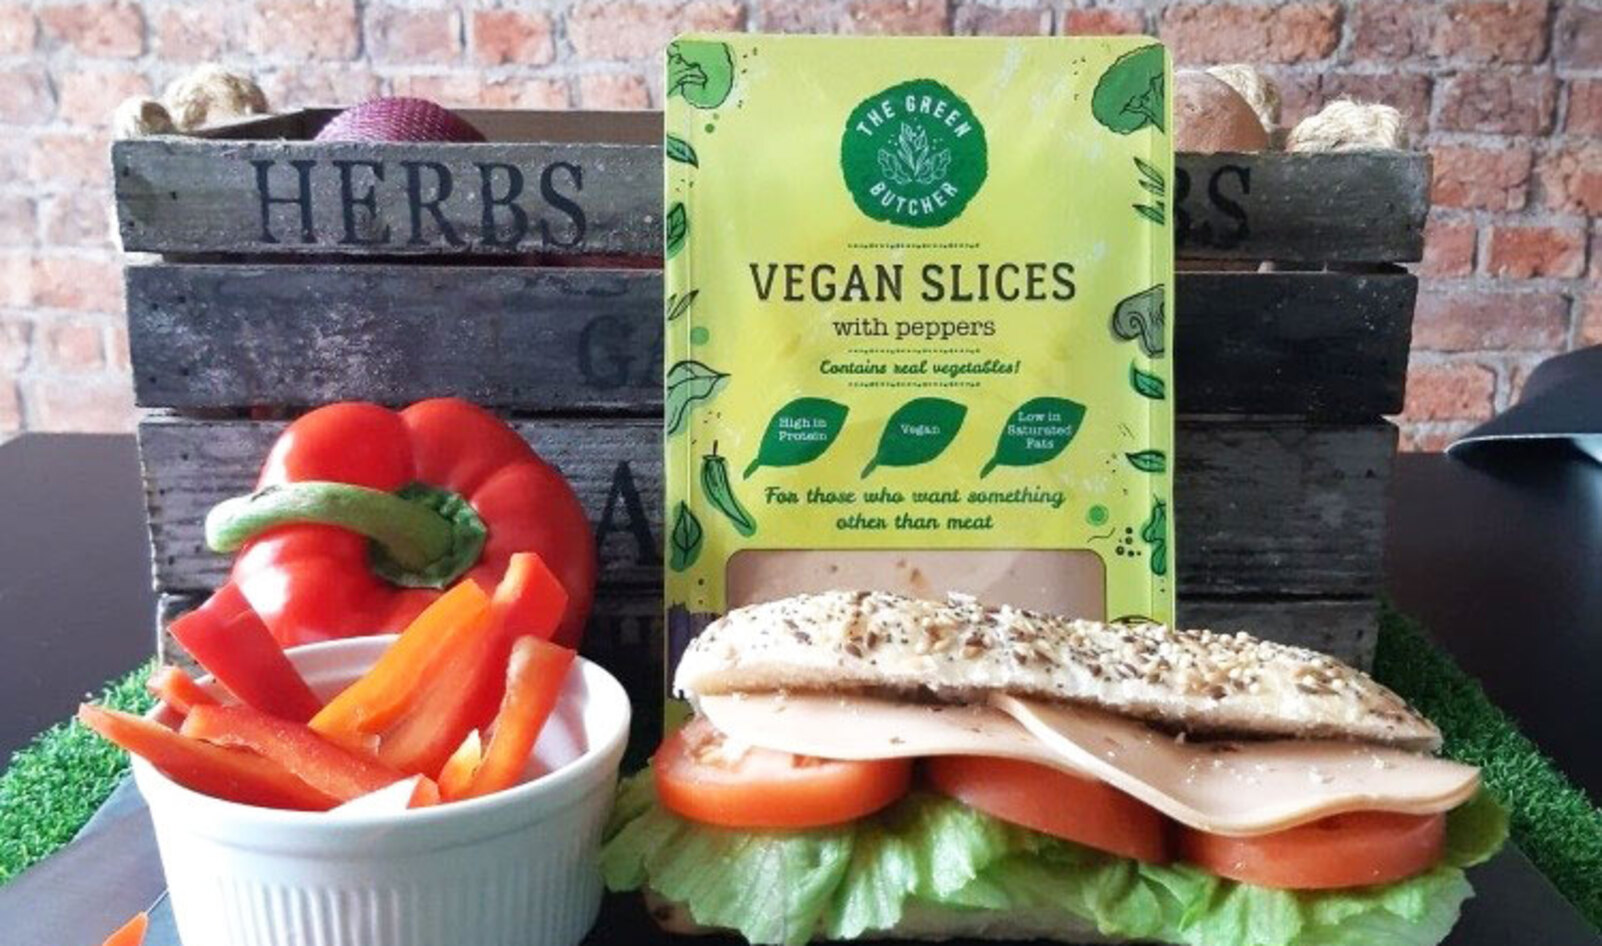 Nearly One in Four New Food Products in the UK Is Vegan